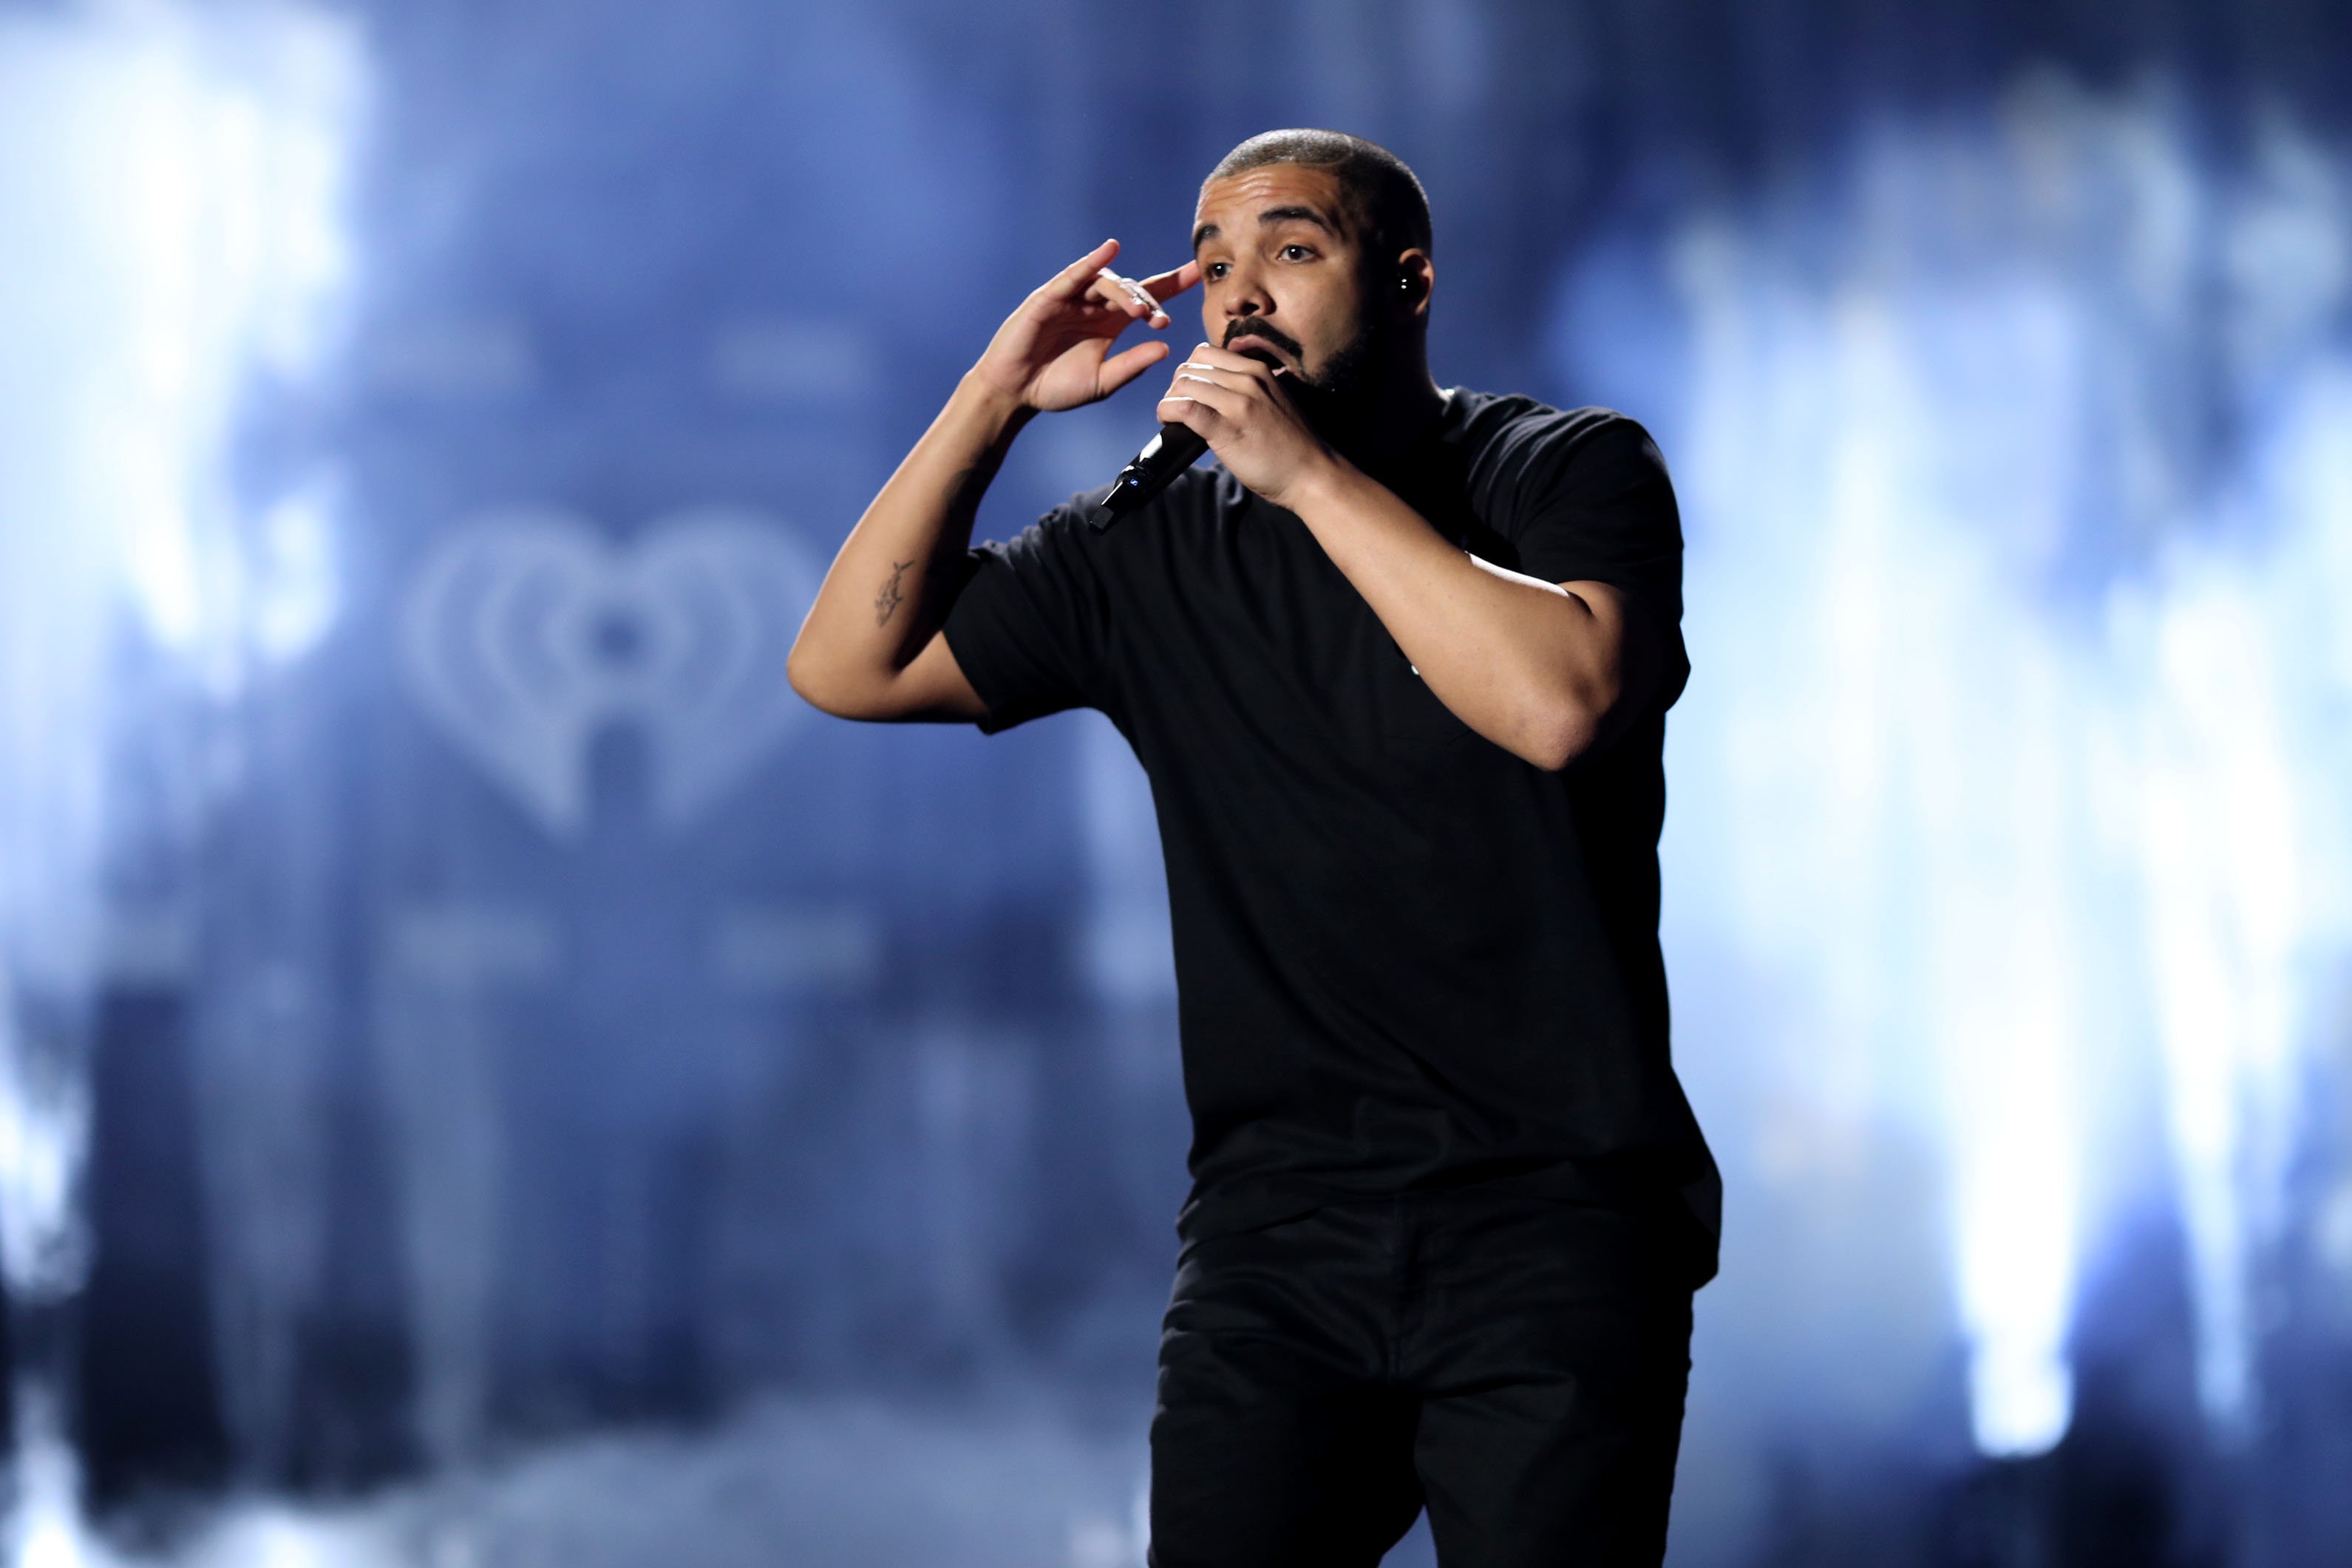 Drake performs onstage at the 2016 iHeartRadio Music Festival at T-Mobile Arena on September 23, 2016 in Las Vegas, Nevada